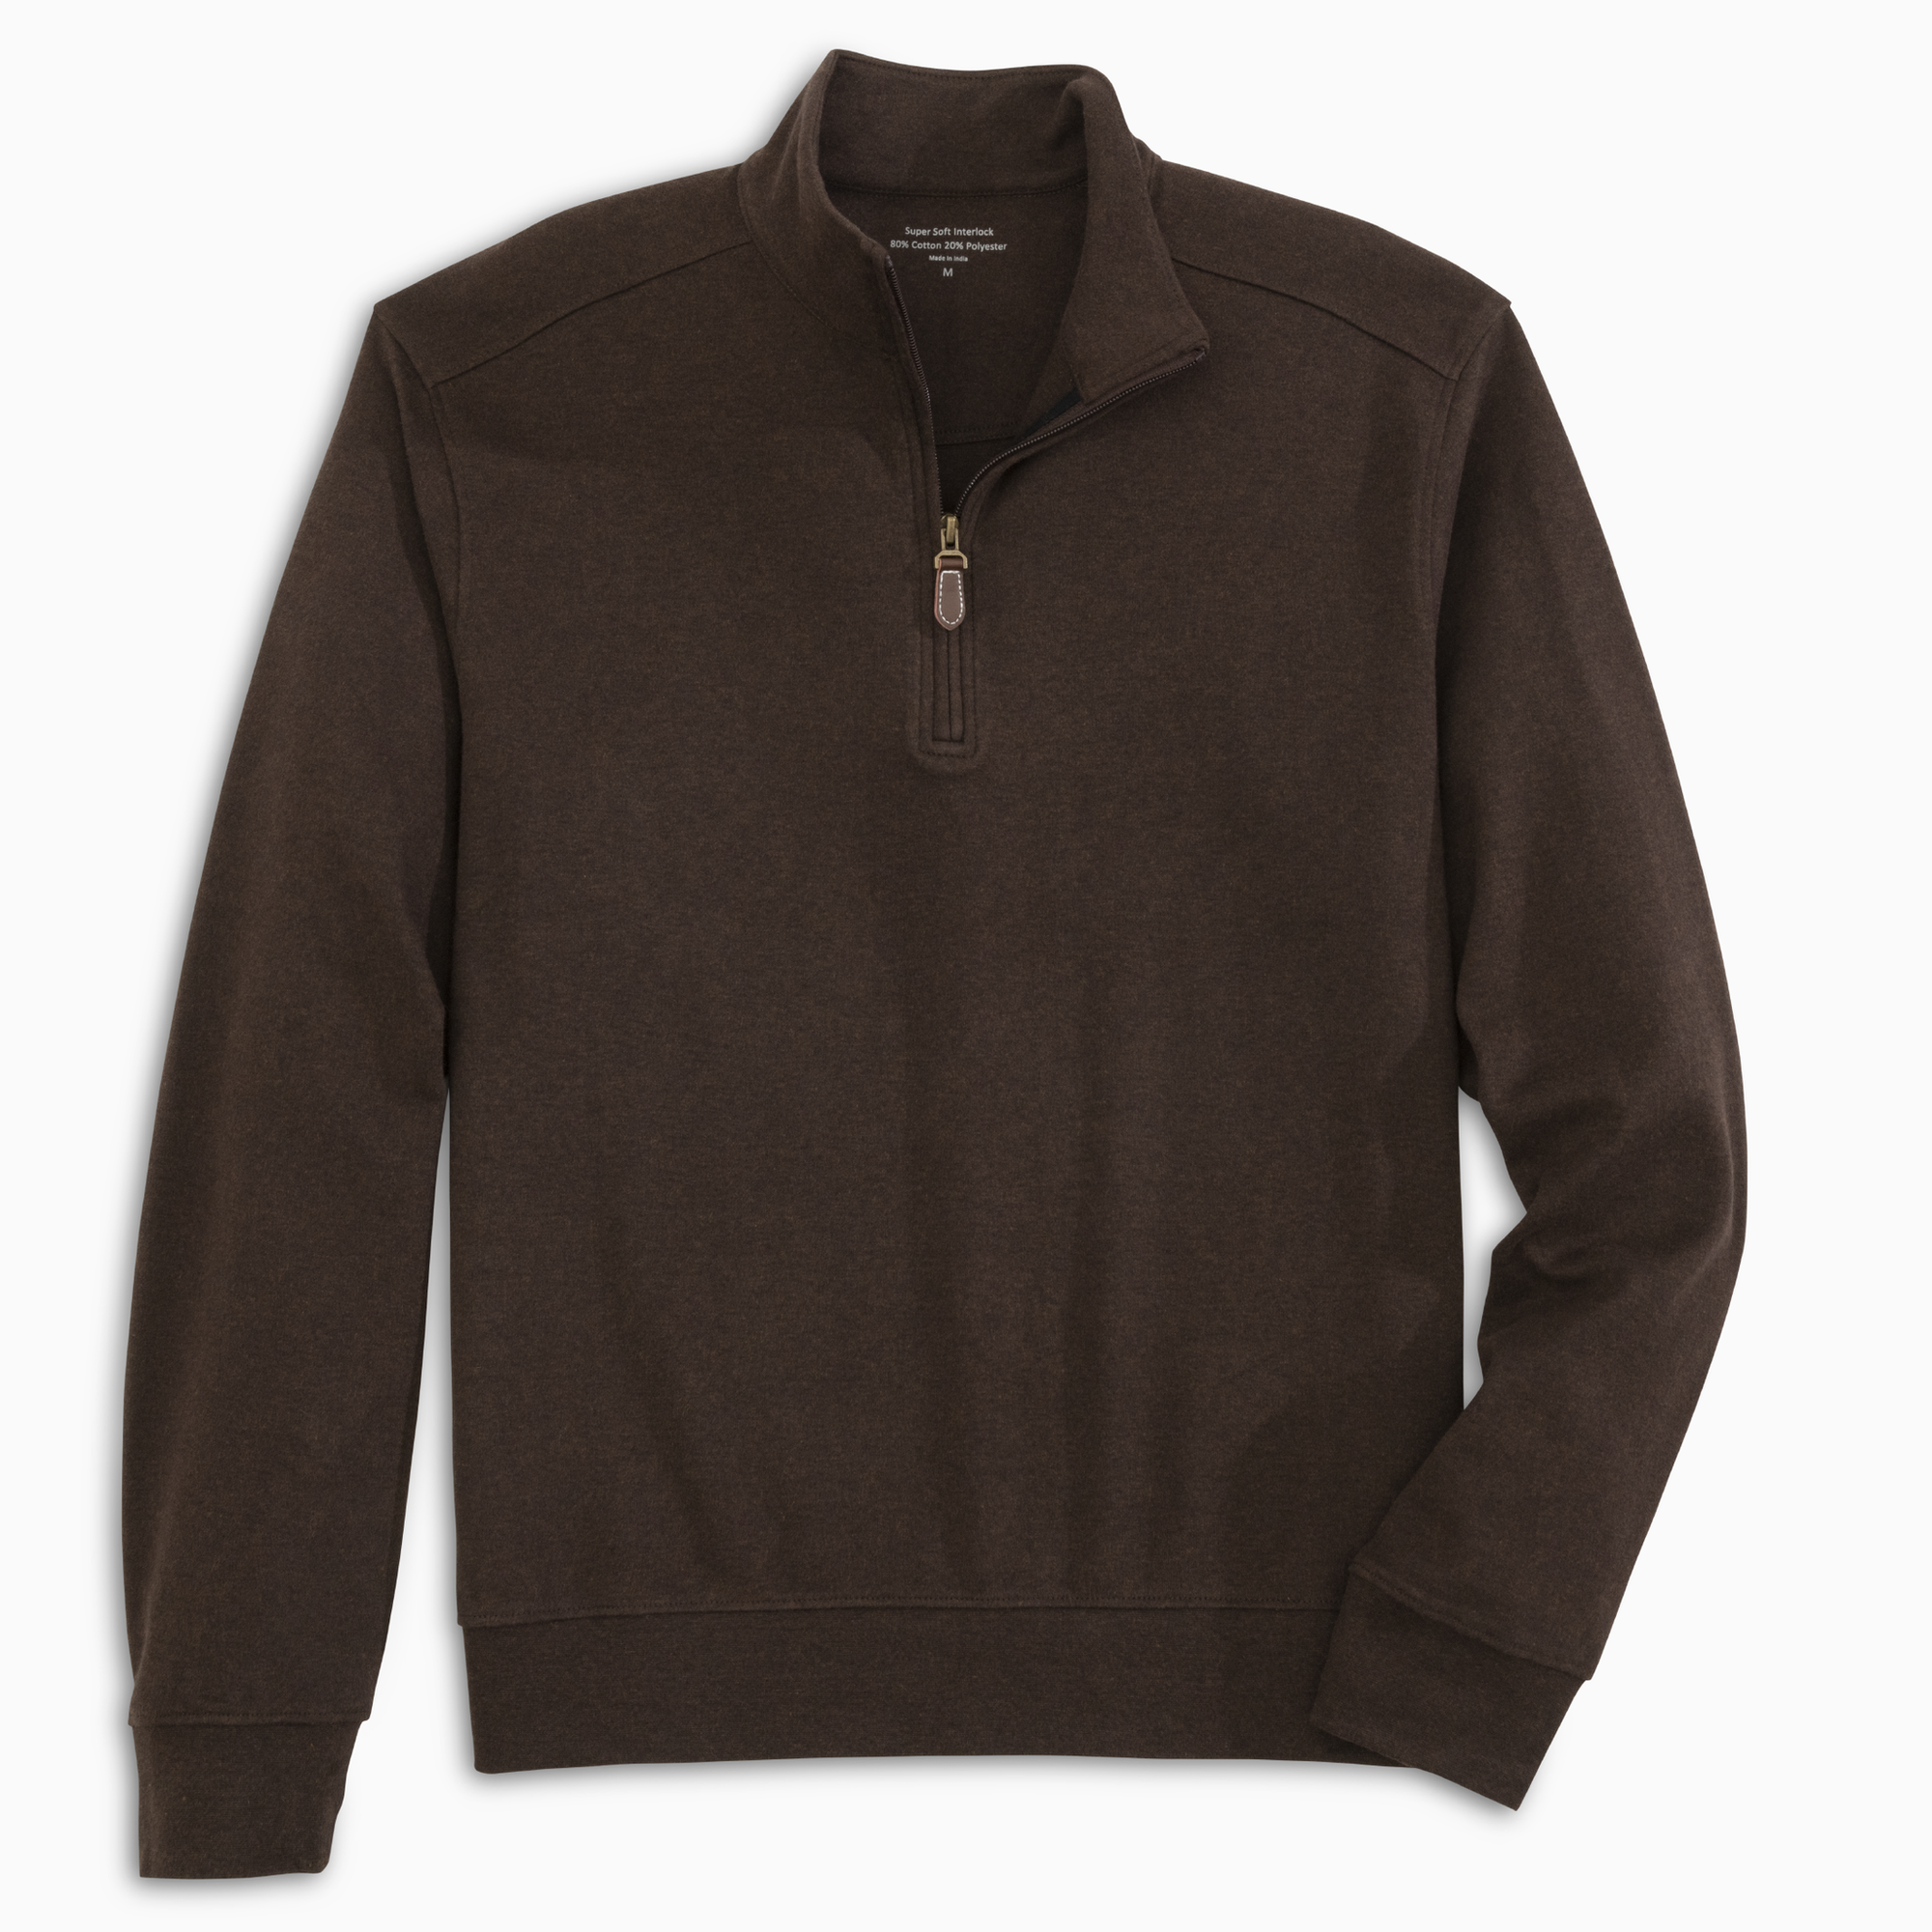 Chandler Quarter-Zip Cotton Performance Pullover in Cocoa by Batton